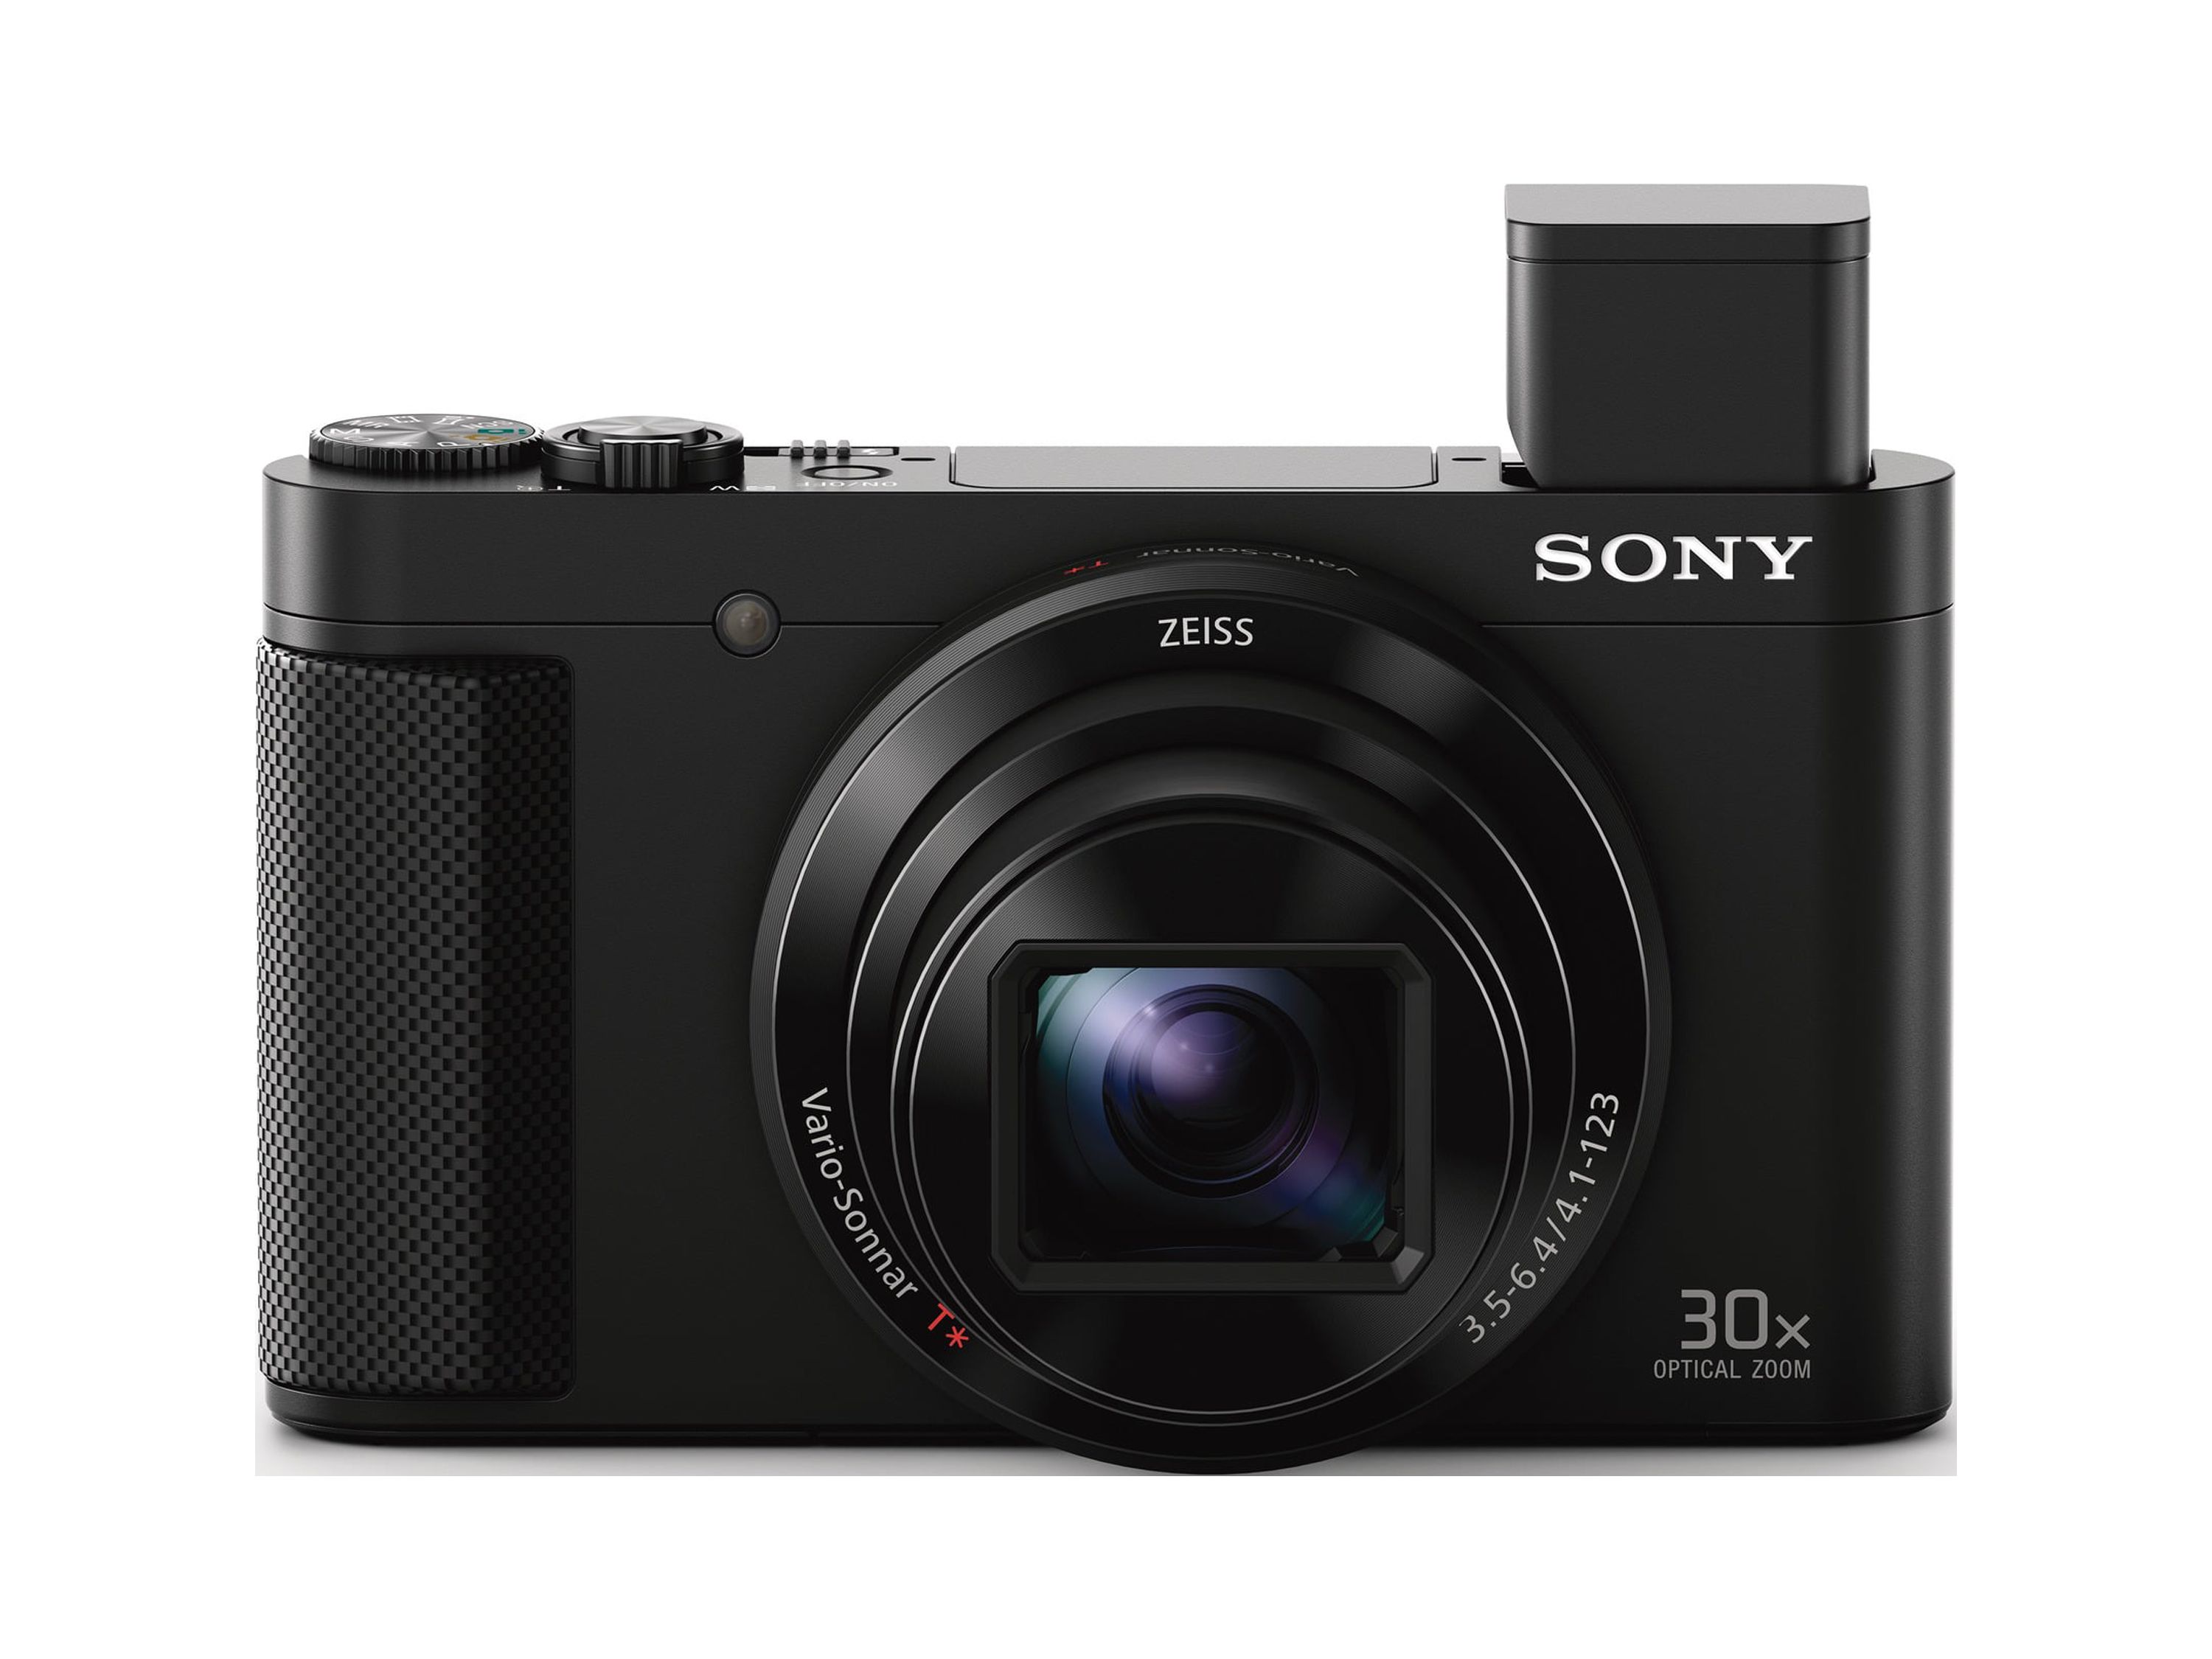 DSC-HX80/B High-zoom Point and Shoot Camera - image 2 of 9